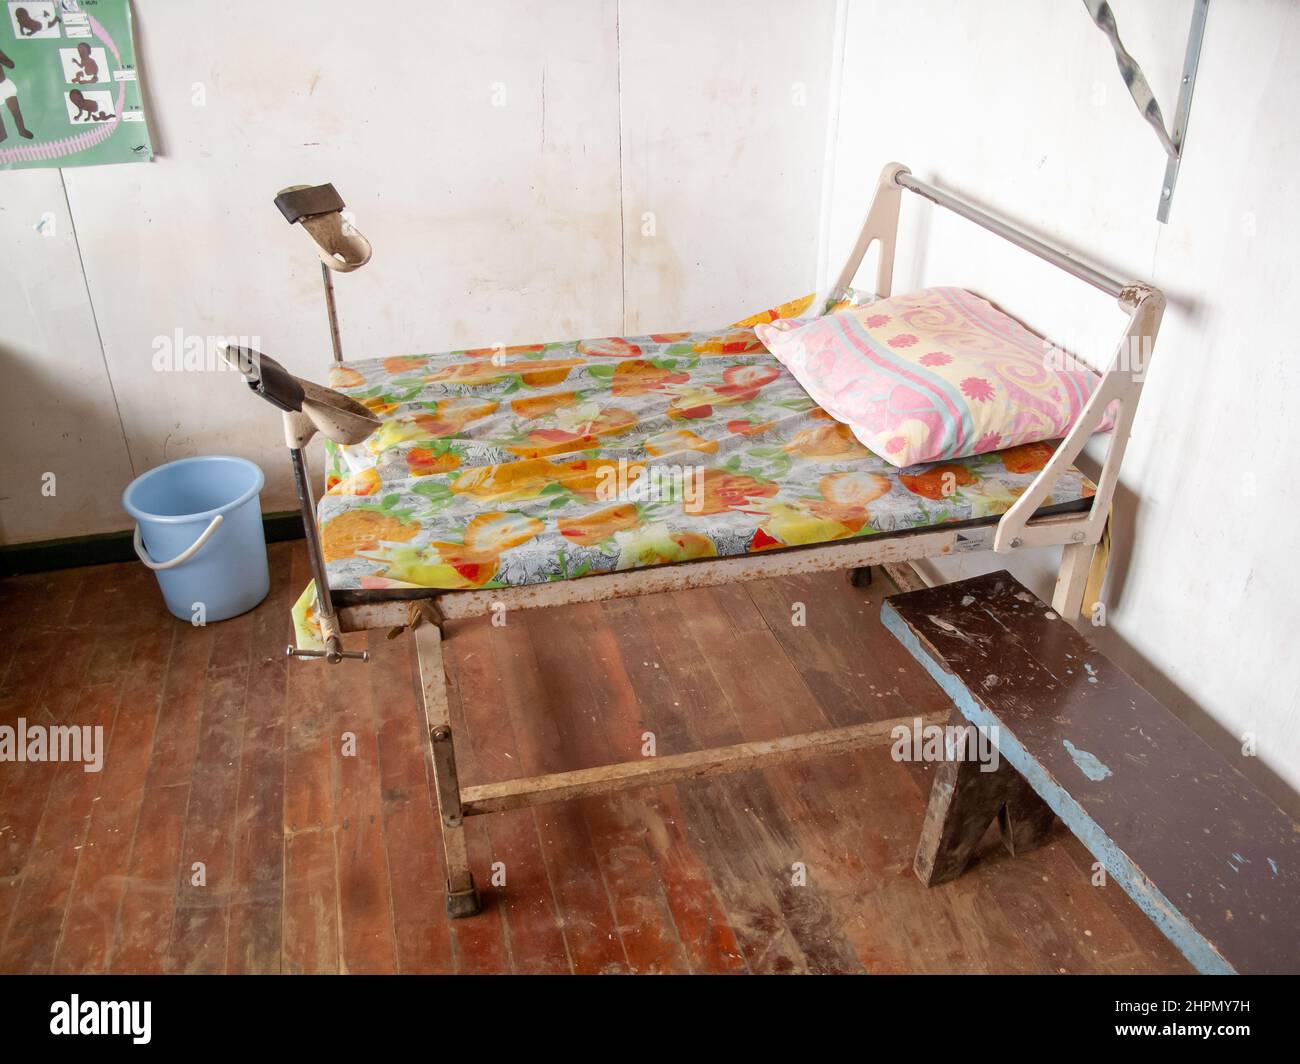 Bed for mothers to deliver babies in remote mountains of Papua New Guinea, low resource setting in a developing country. Stock Photo